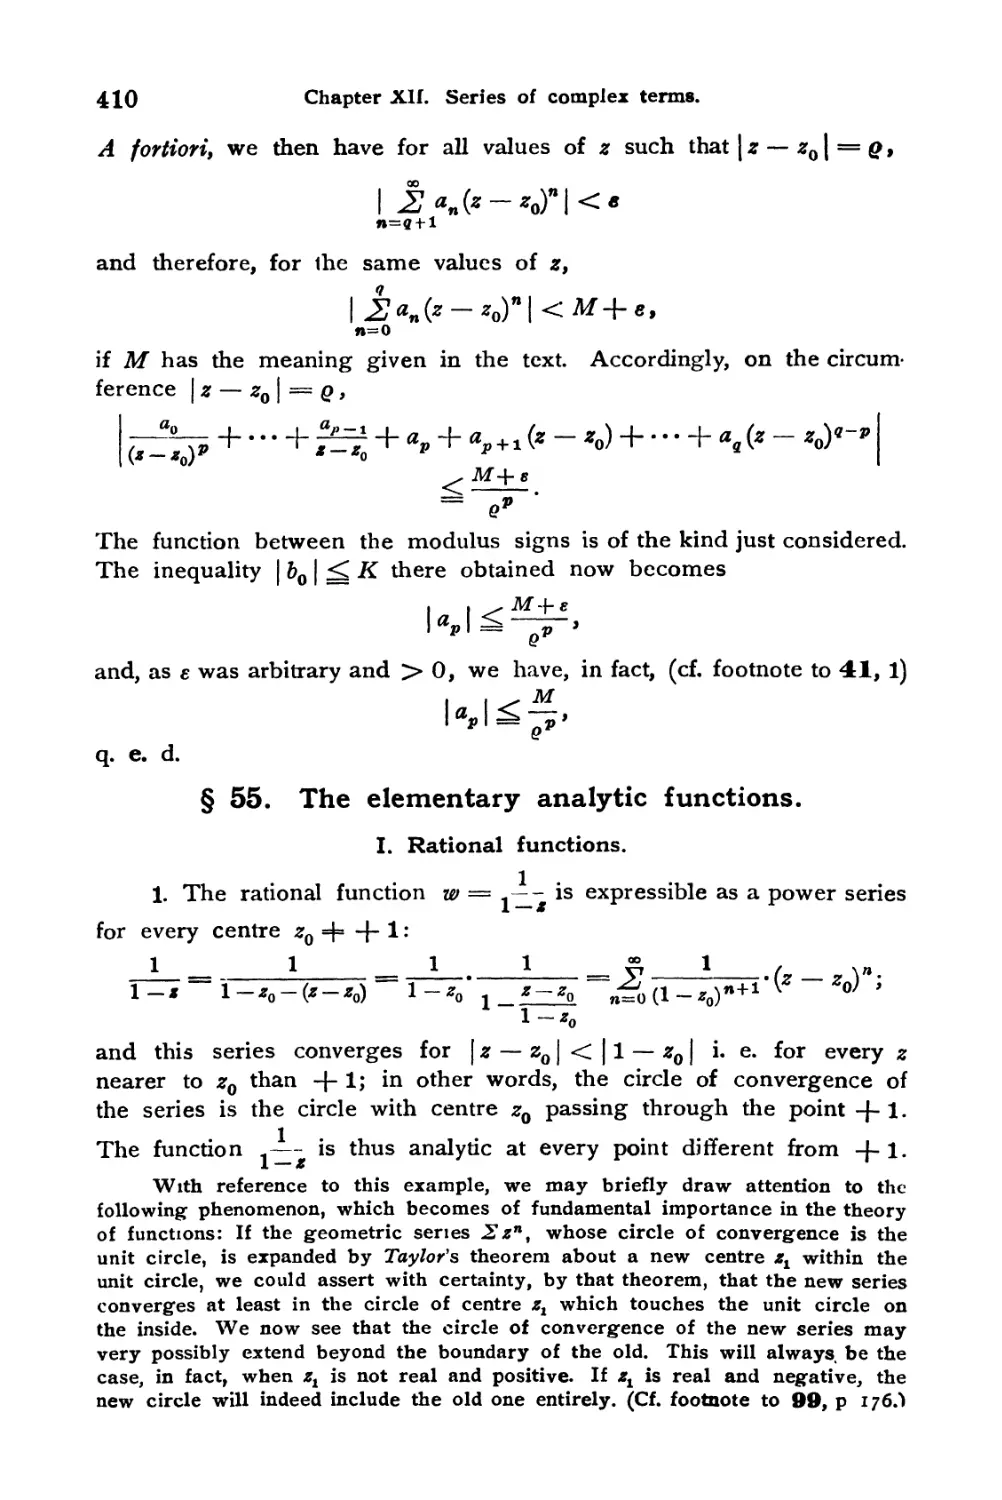 § 55. The elementary analytic functions